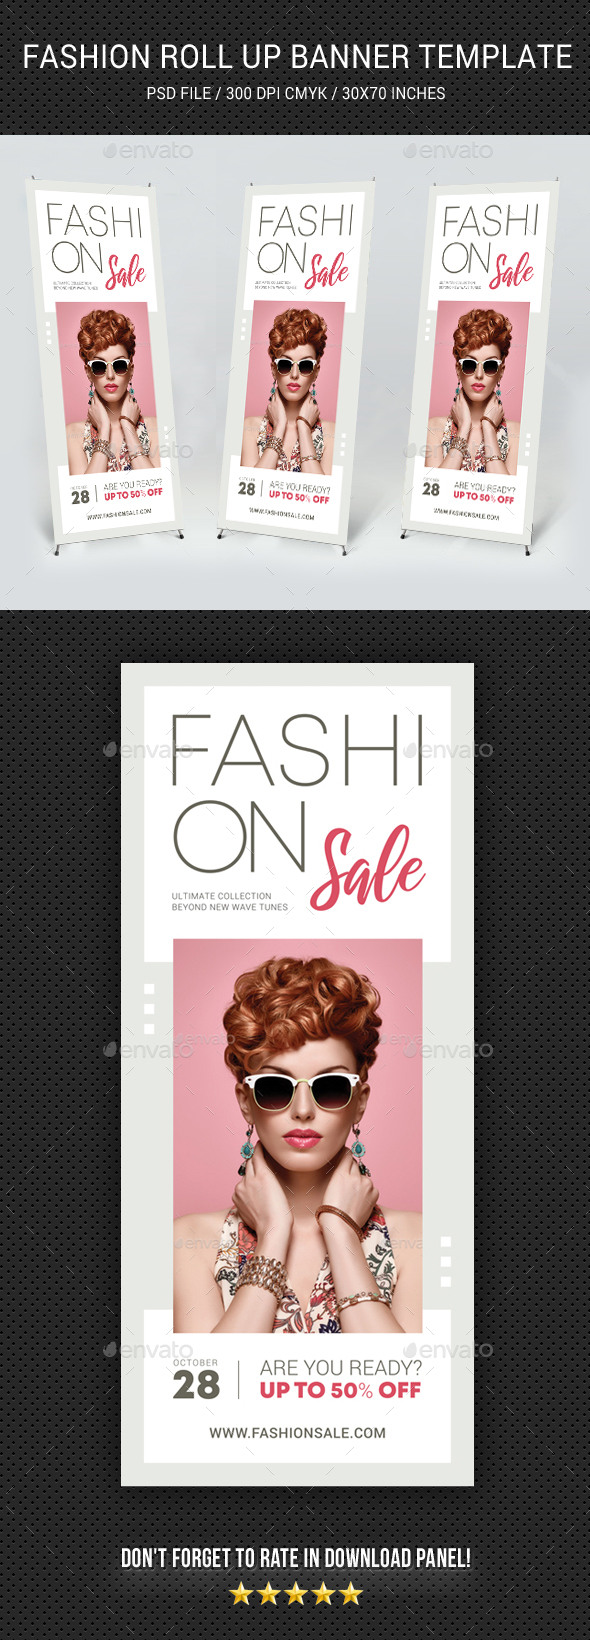 Fashion Sale Roll-Up Banner